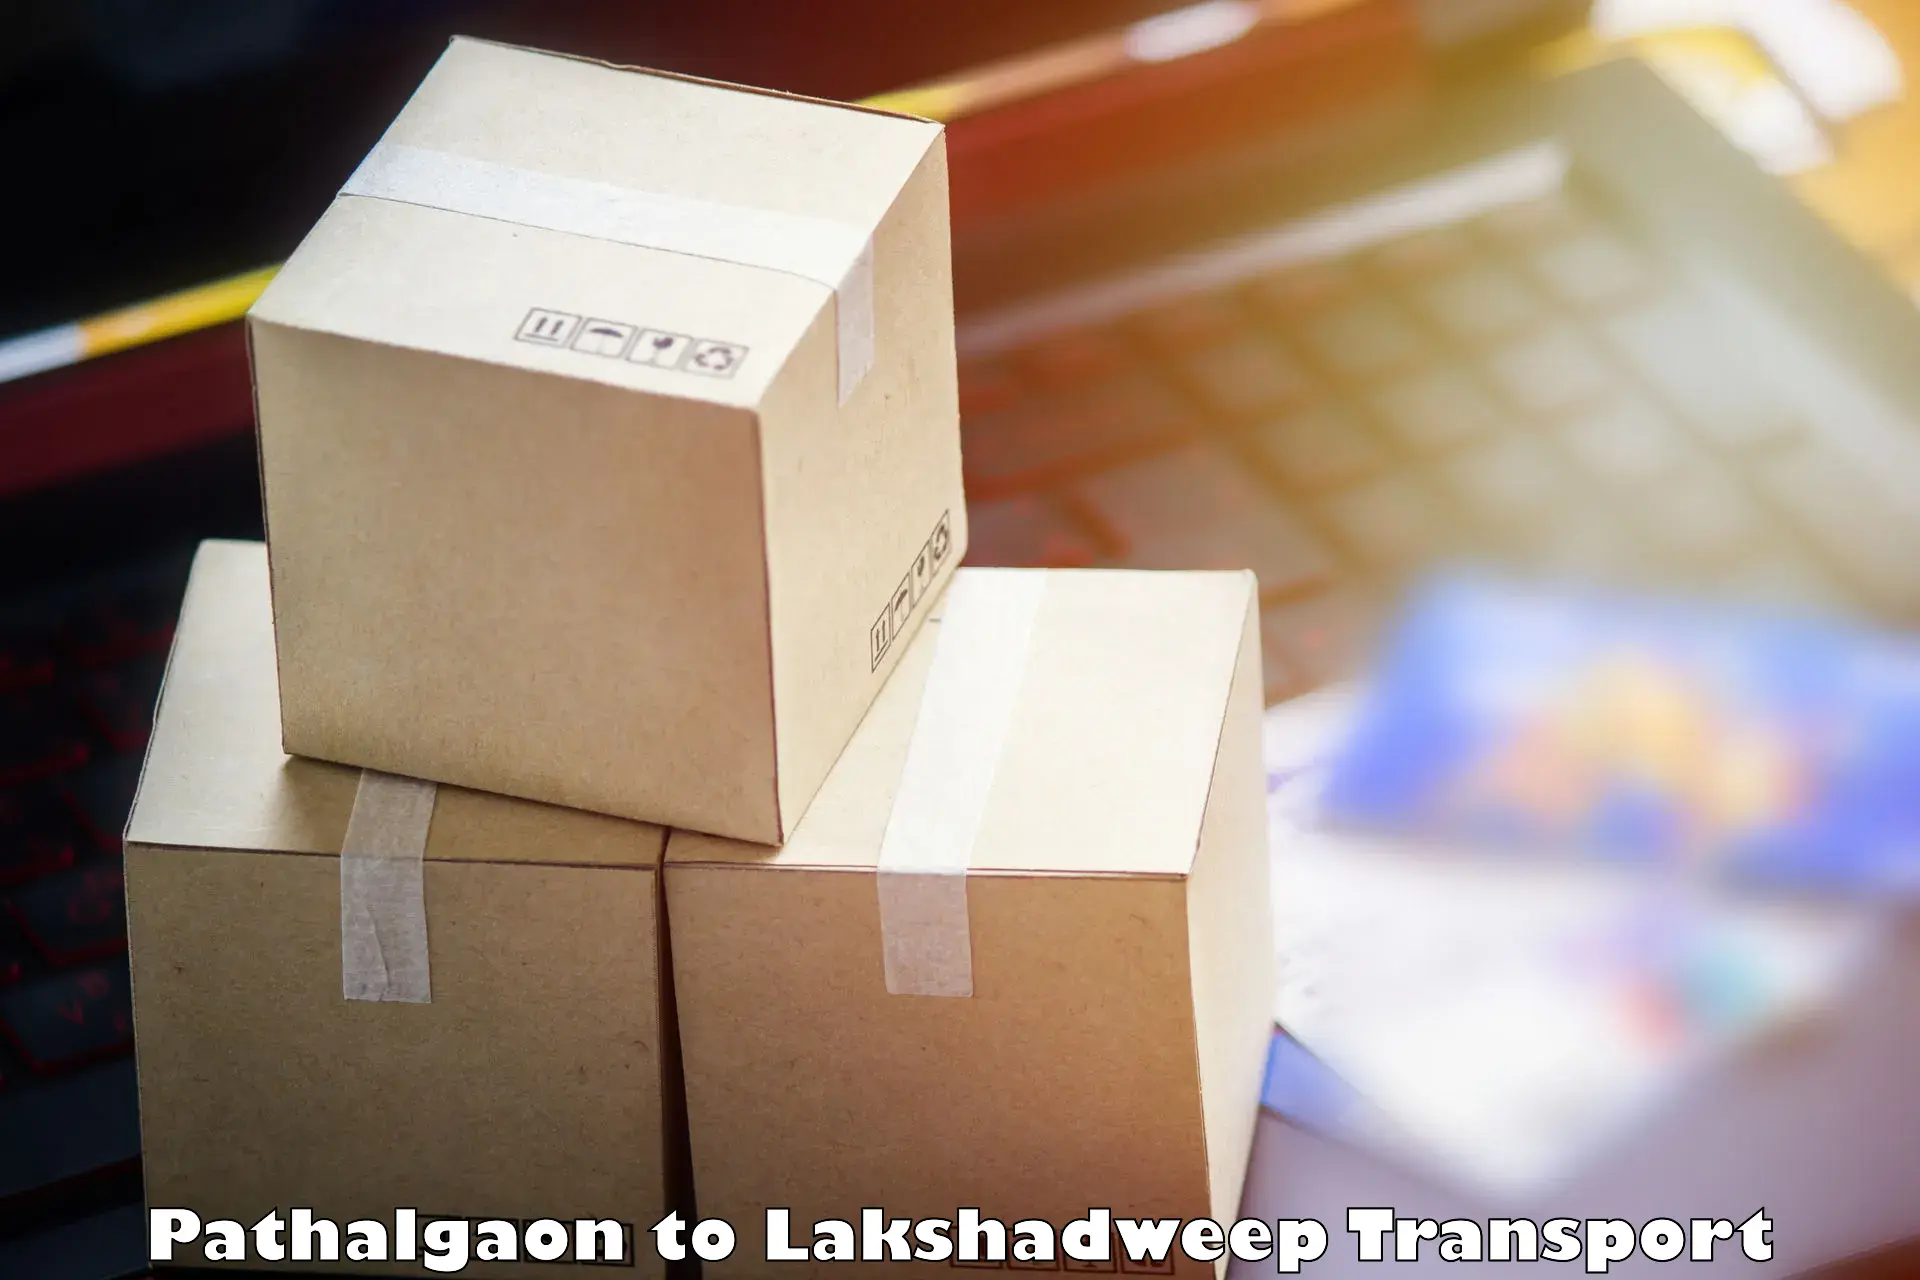 Commercial transport service Pathalgaon to Lakshadweep